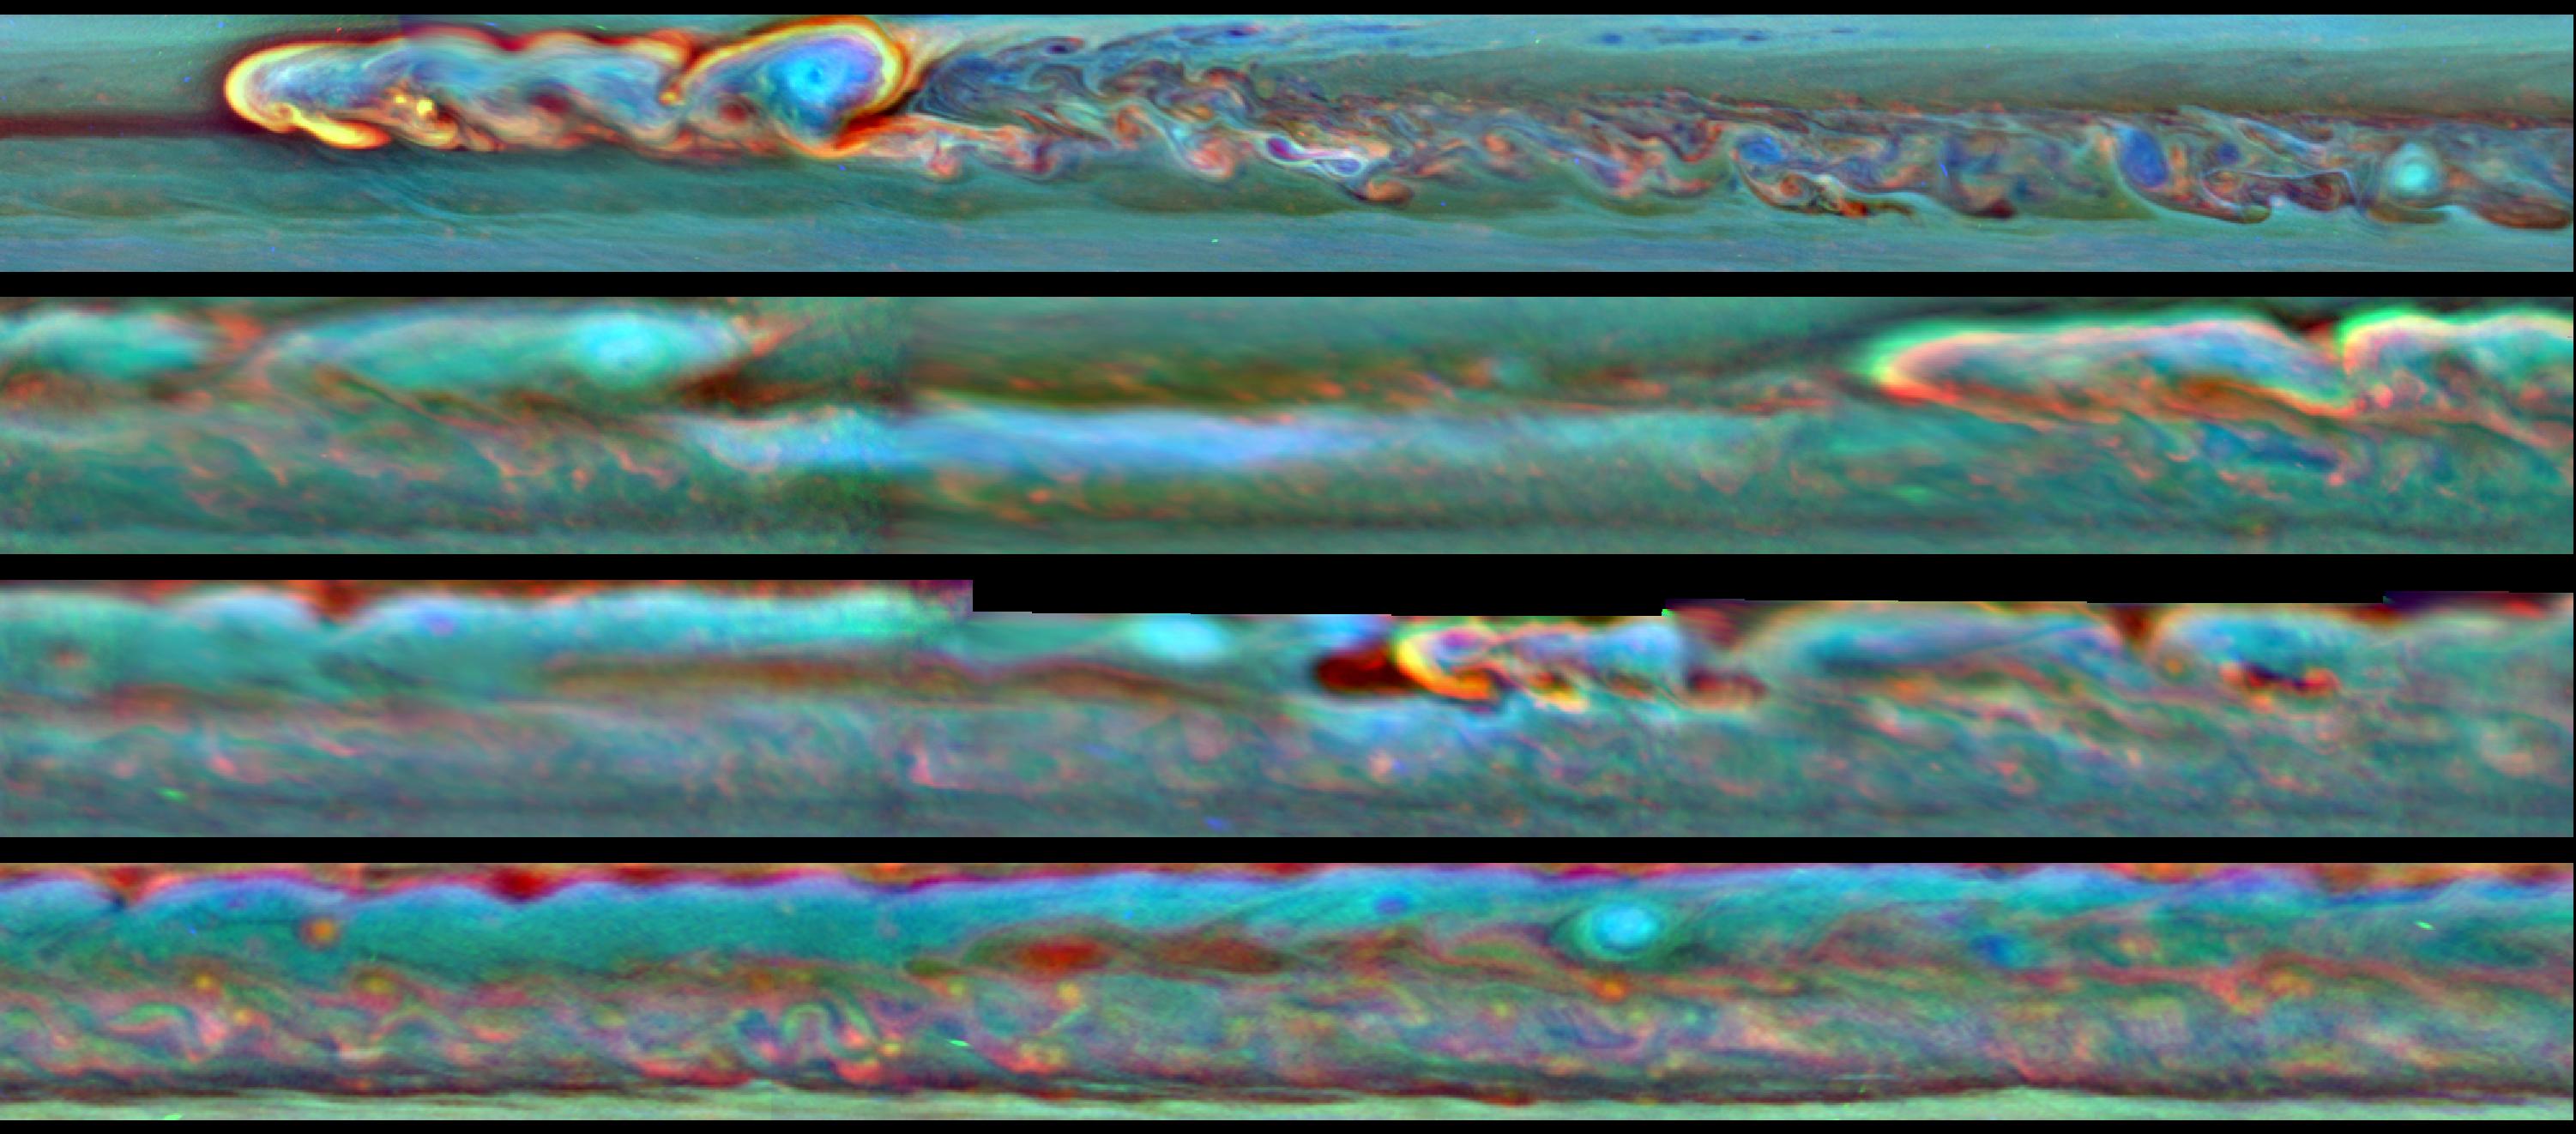 Set of Cassini images showing the evolution of a massive storm on Saturn - unannotated